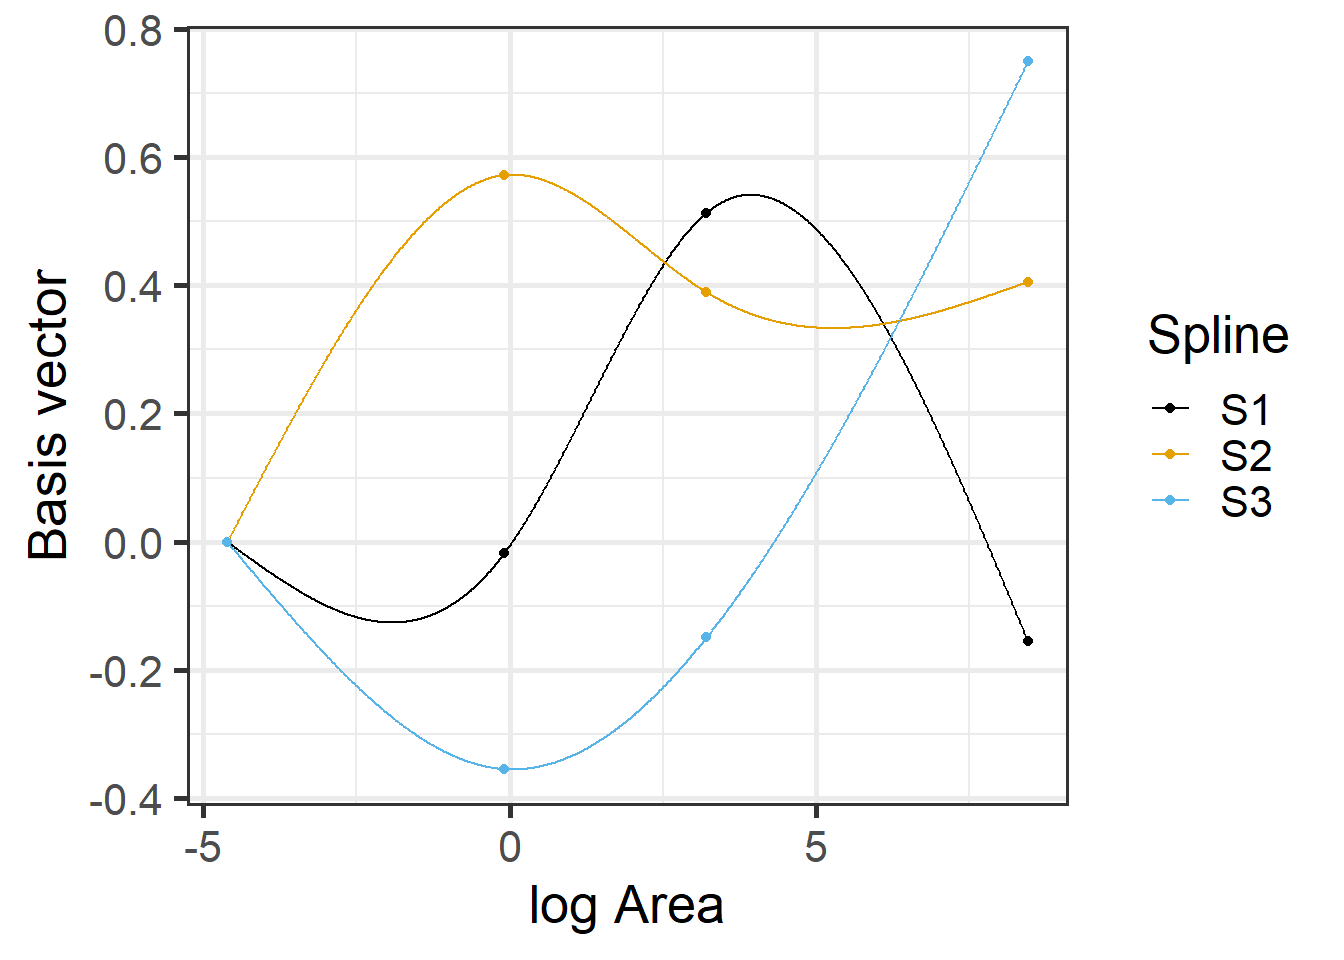 Basis vectors used in the fitting of the natural cubic regression spline model relating plant species richness to log(Area) for 29 islands in the Galapagos Islands archipelago. Data are from (Johnson & Raven, 1973).